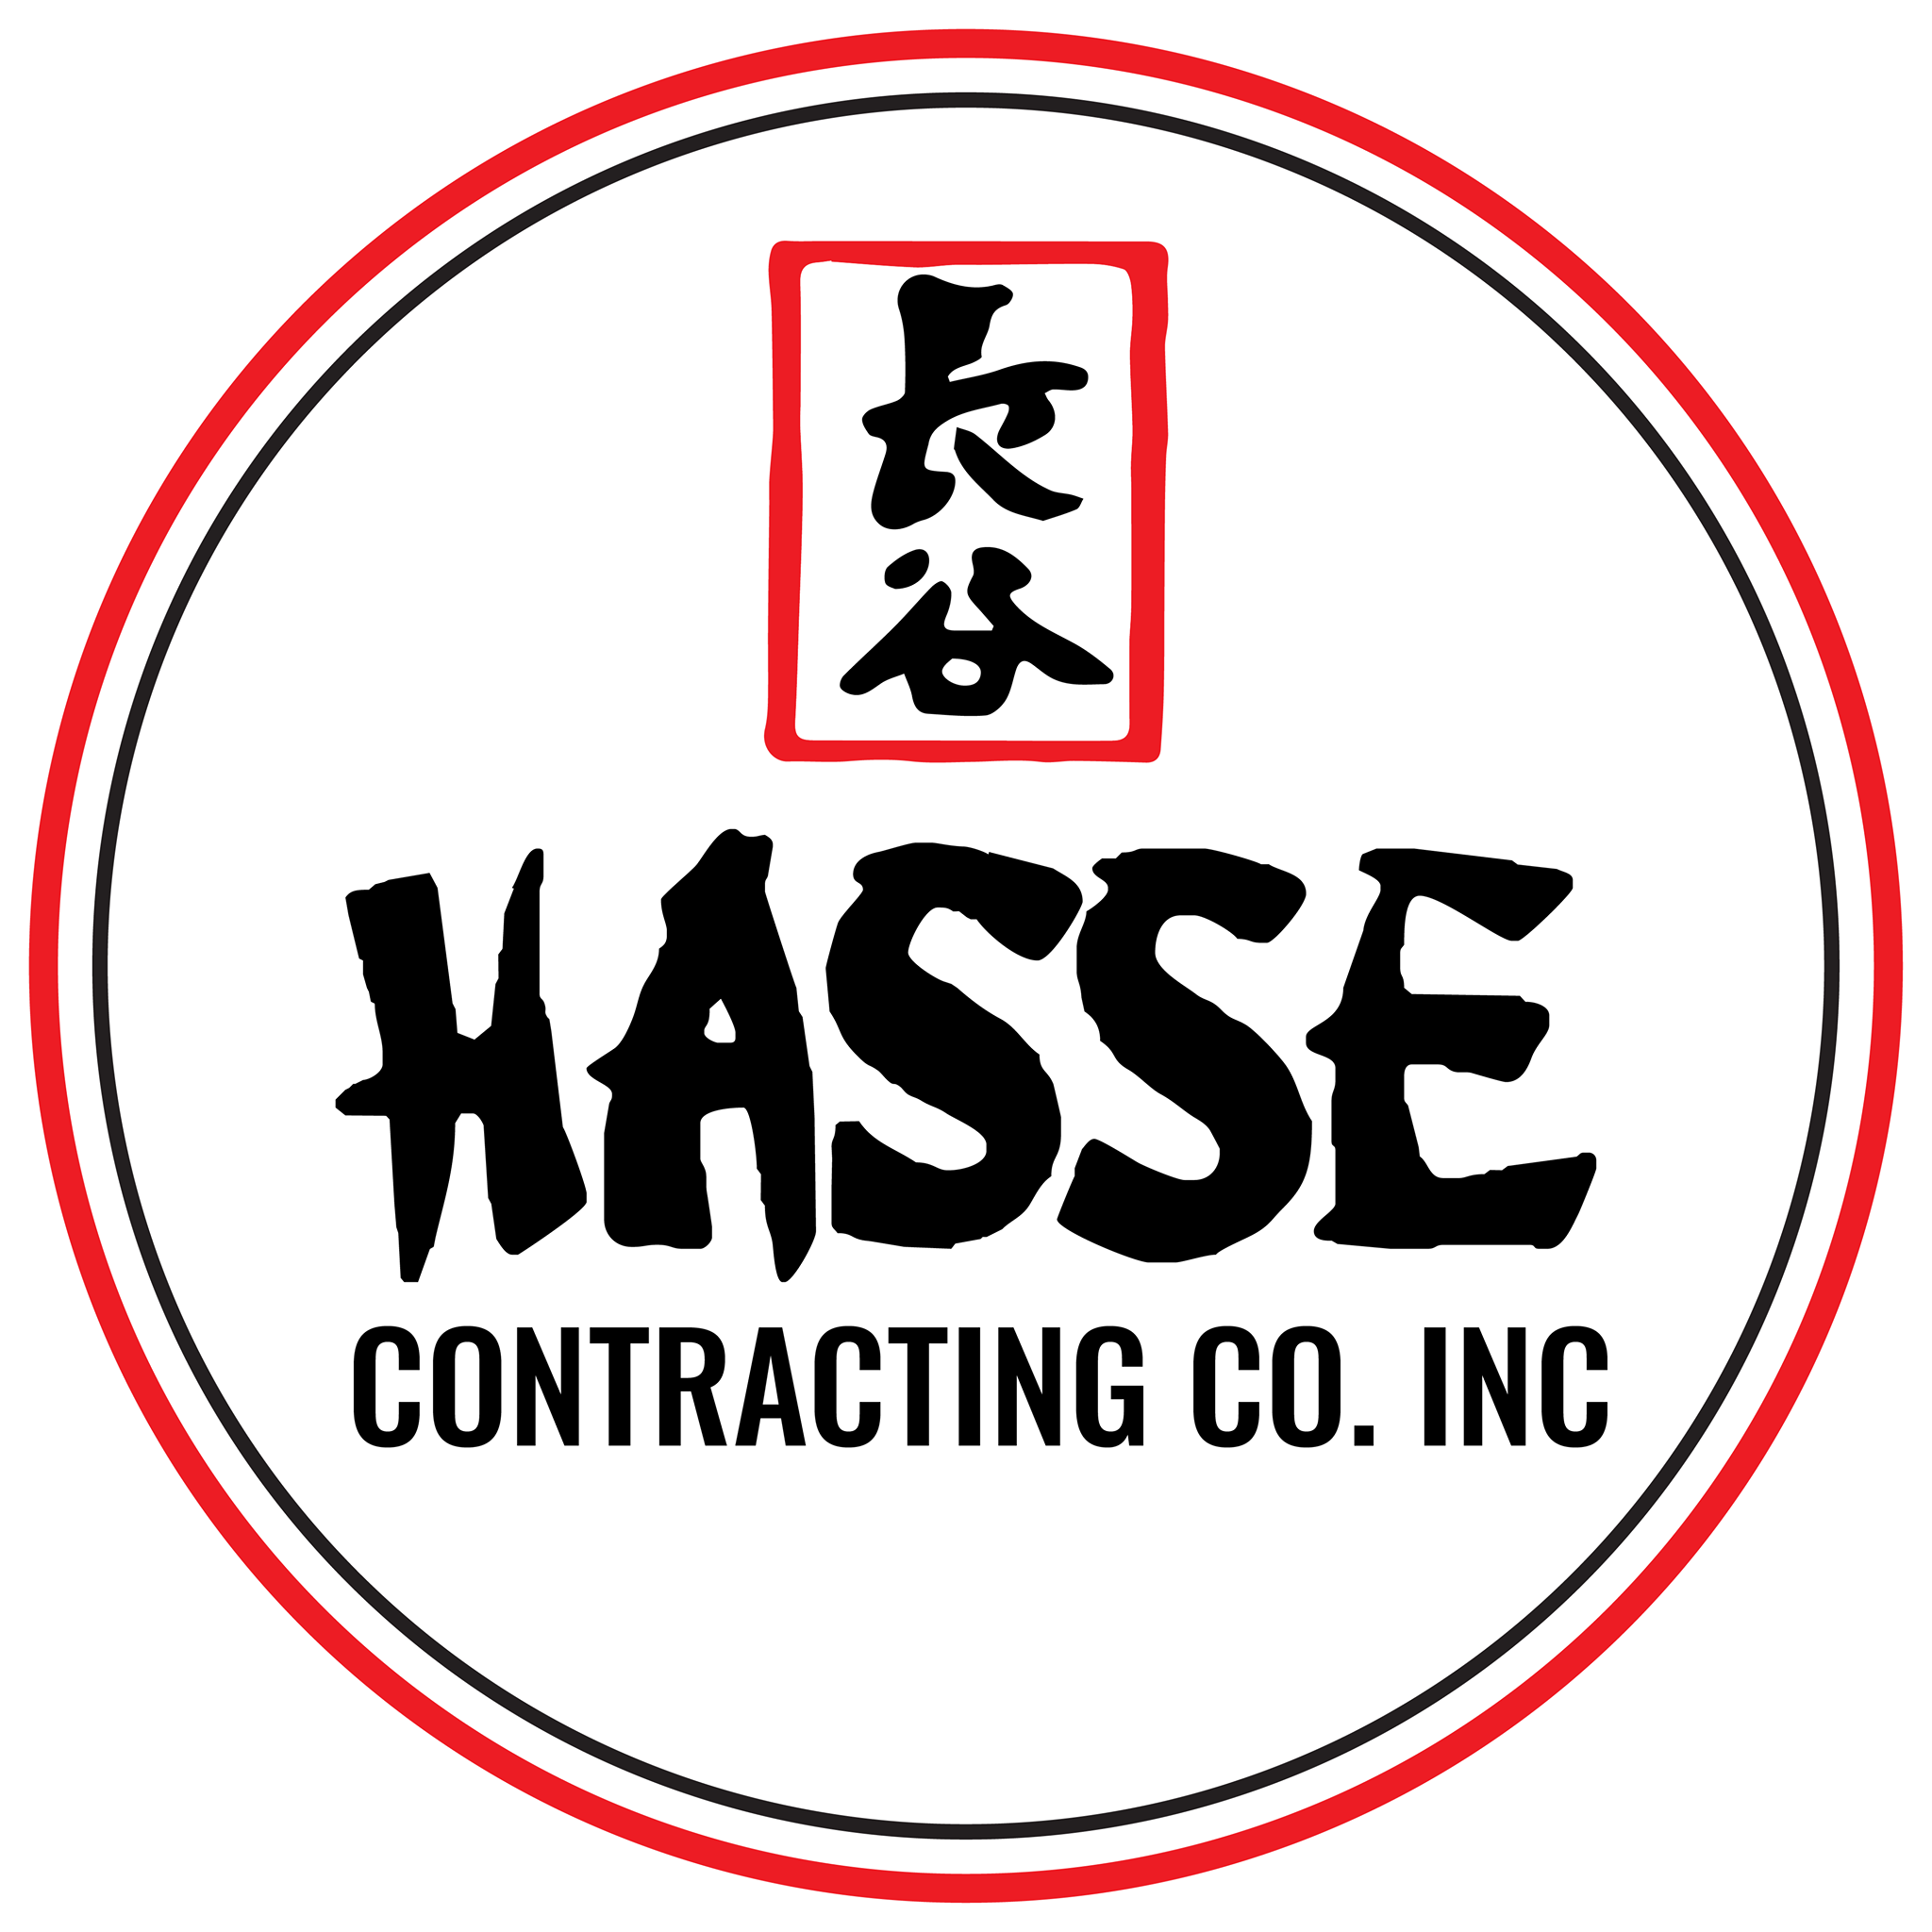 Hasse Contracting